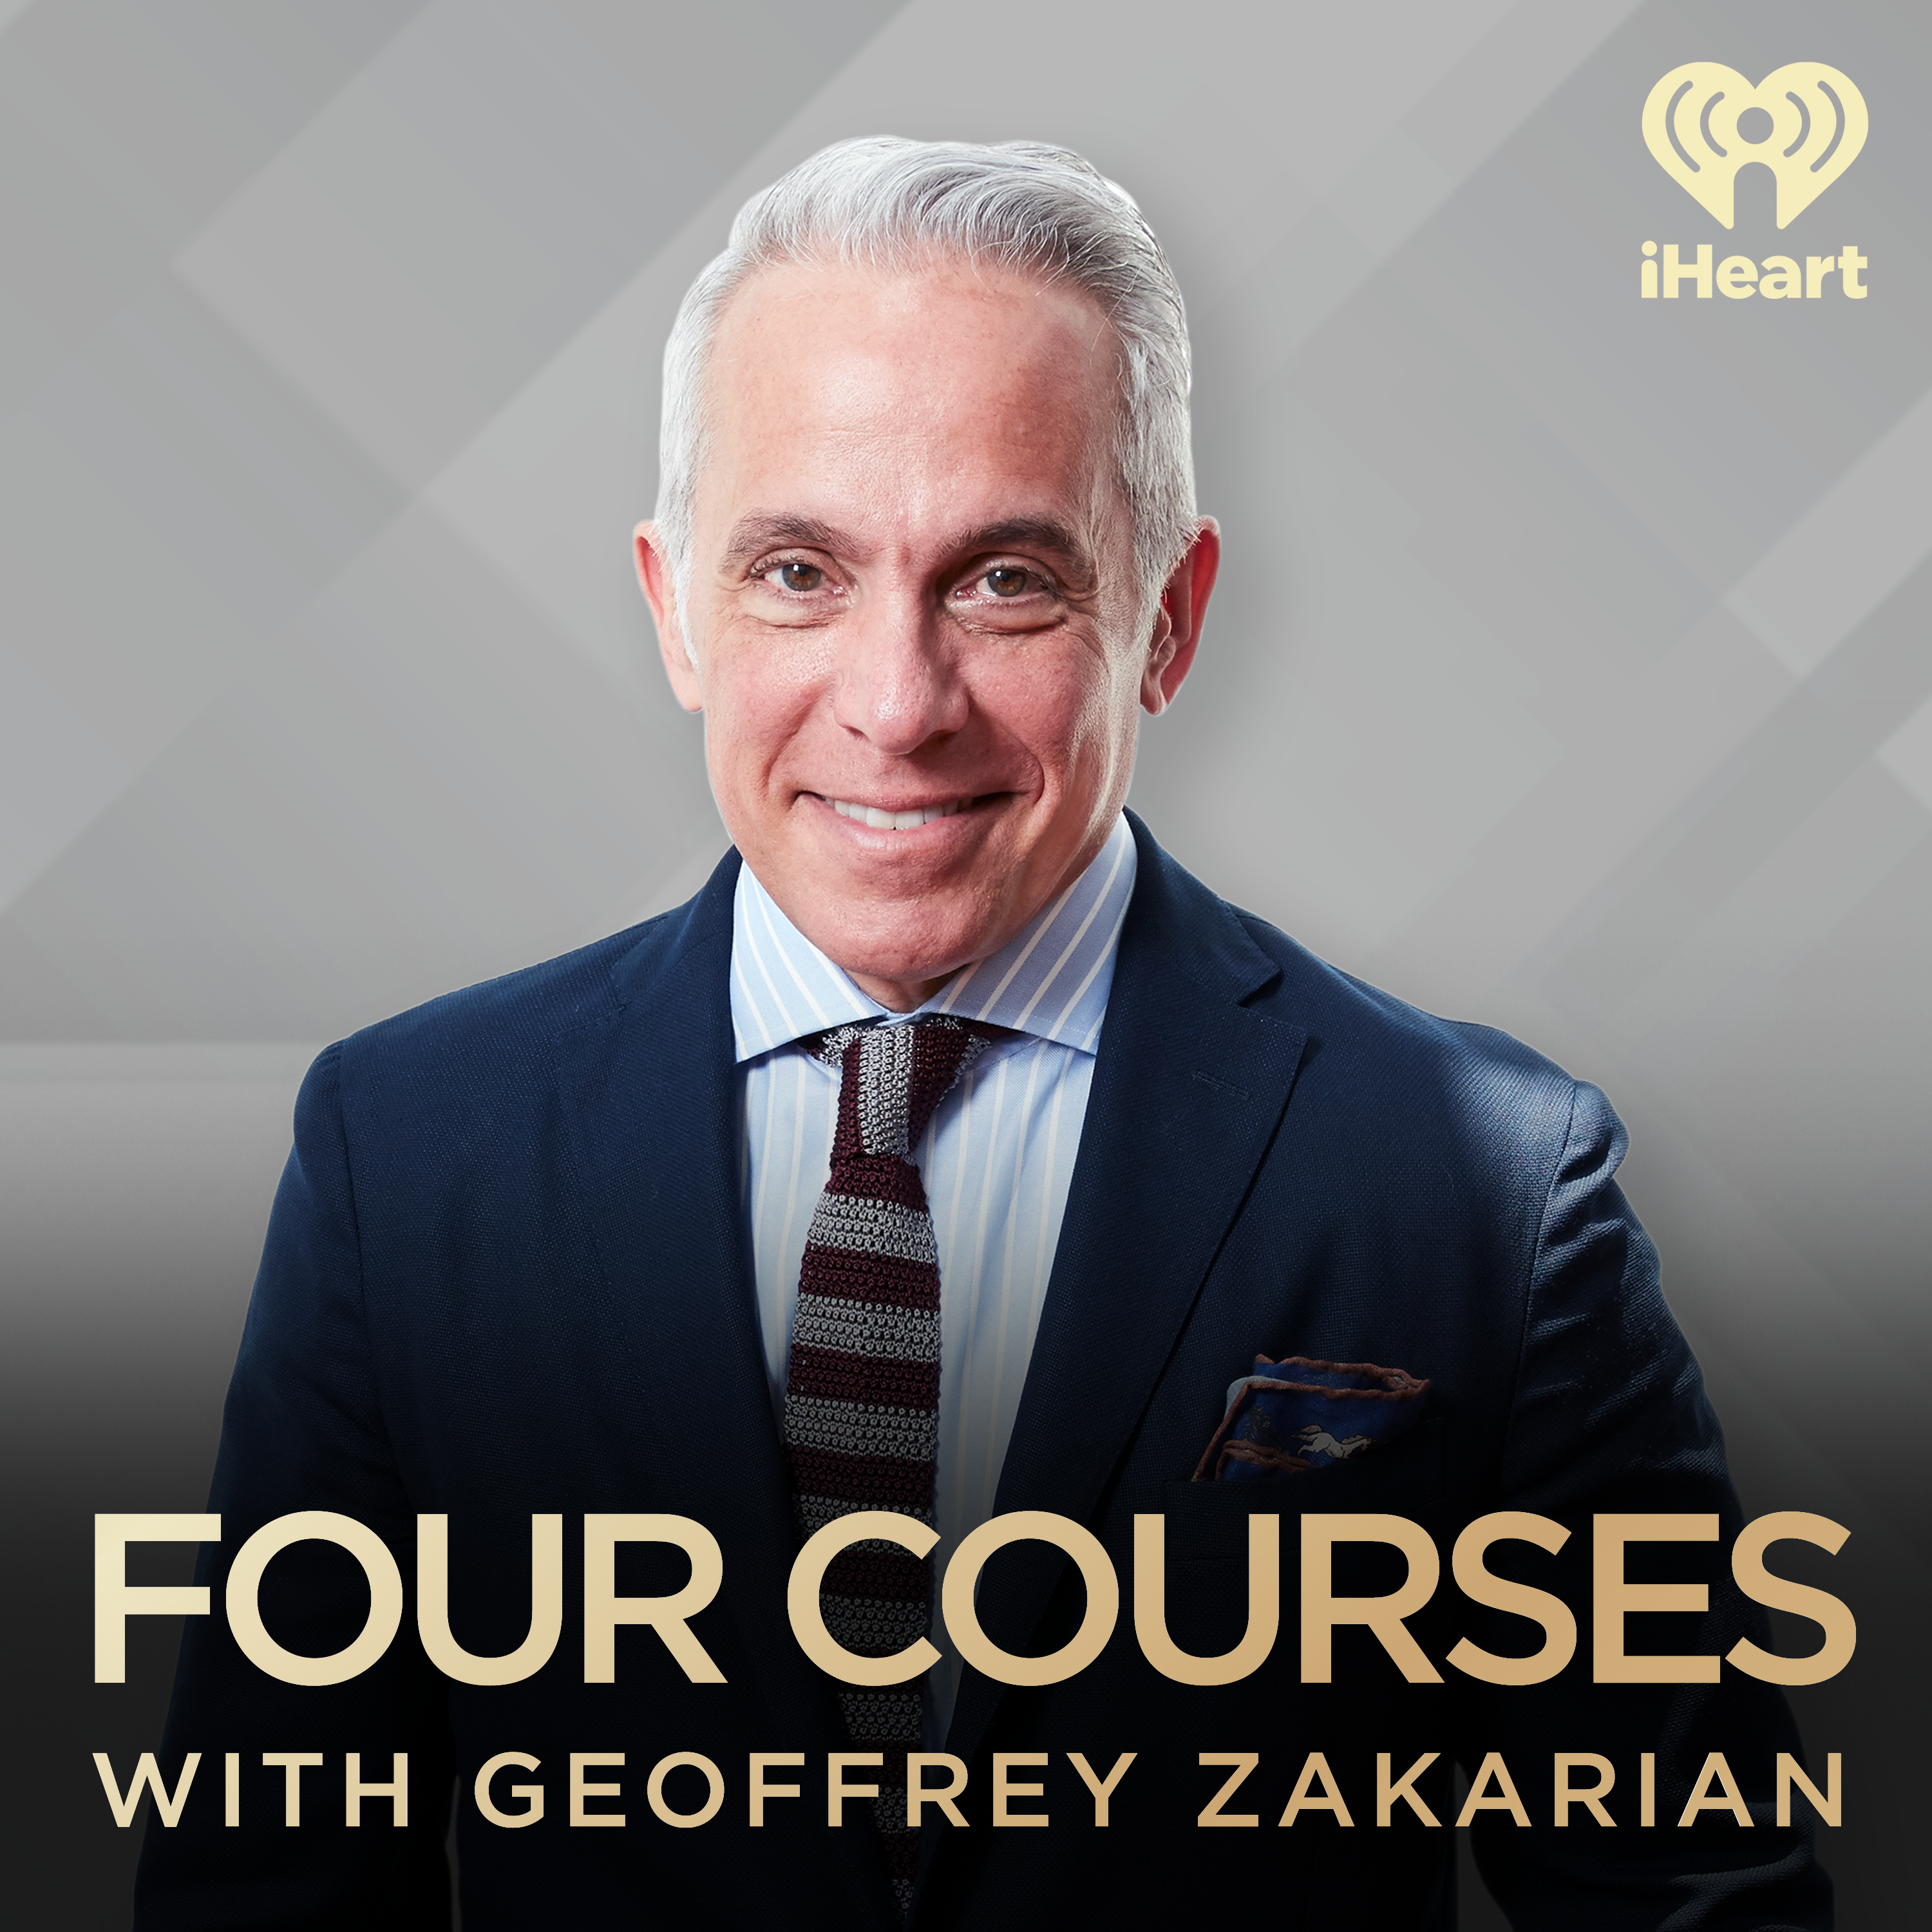 Turning the Table - Geoffrey Zakarian’s Career Ascension (Part 2/3)